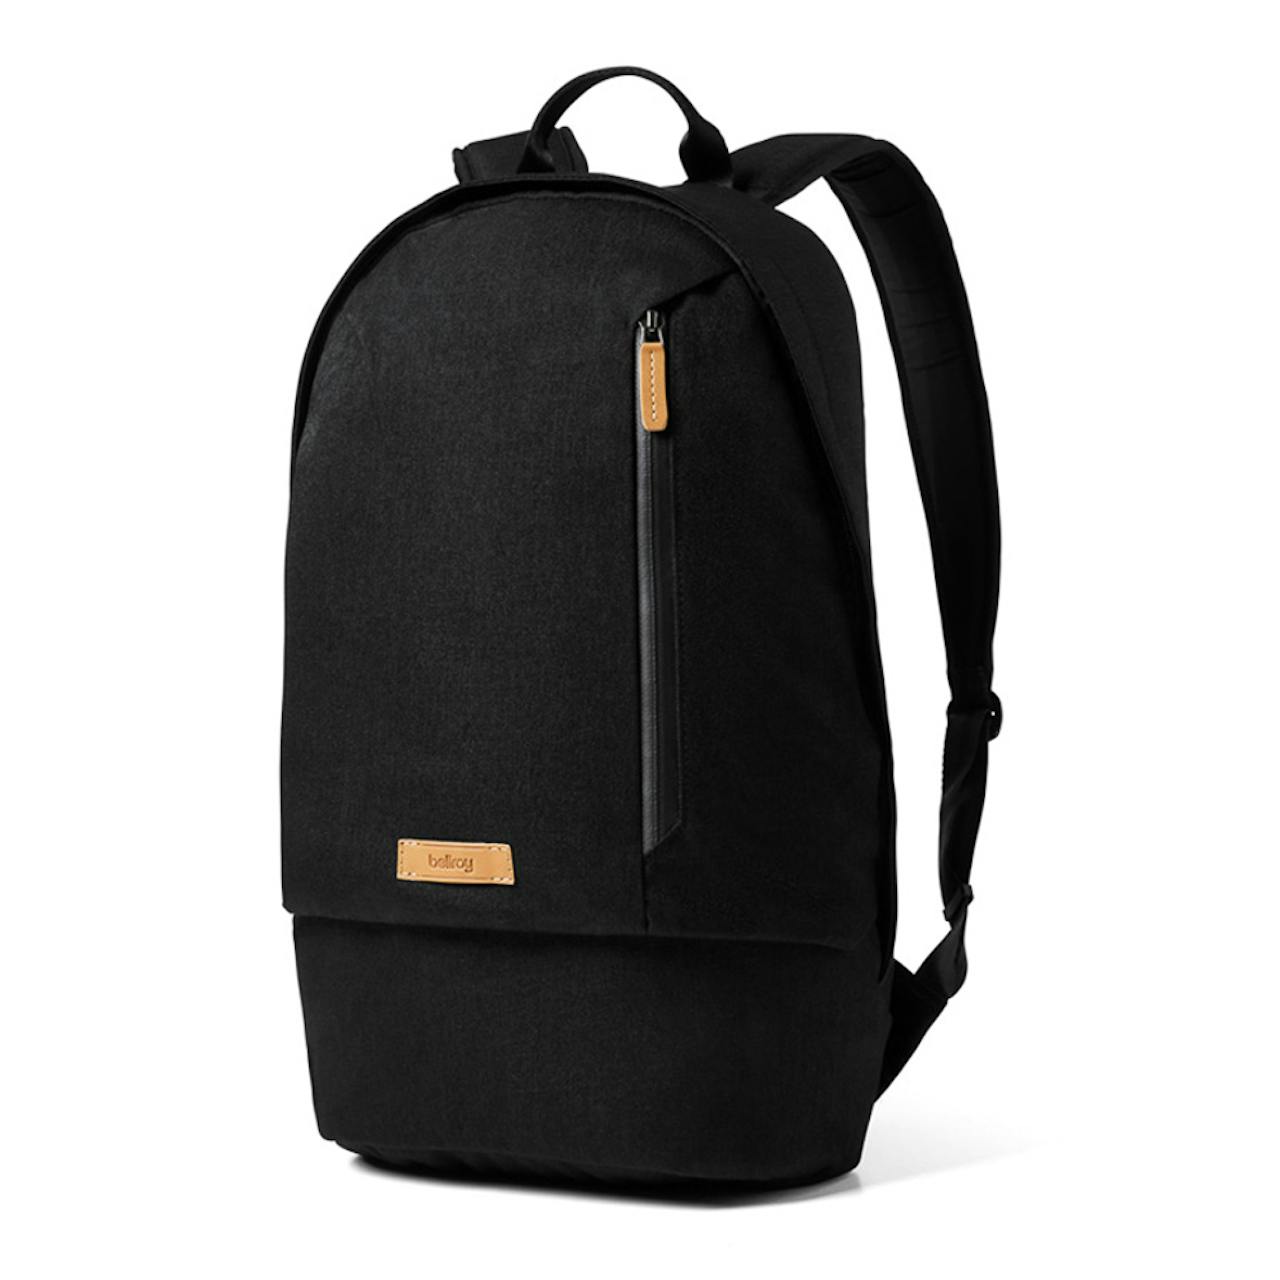 Bellroy Campus Backpack